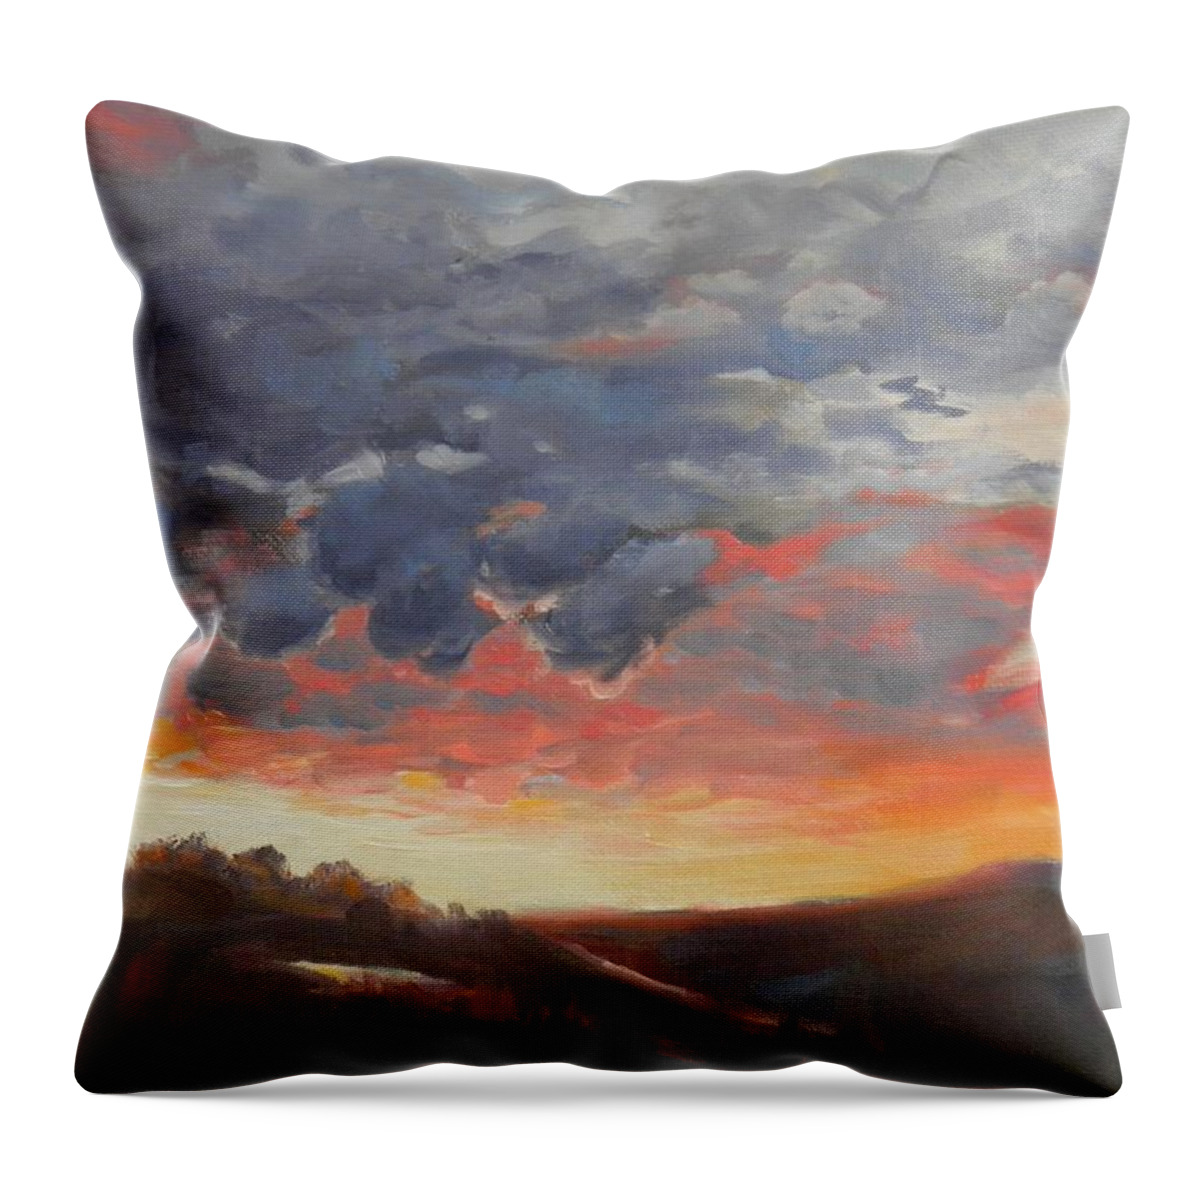 Storm Clouds Throw Pillow featuring the painting Colorful Clouds by Sharon Casavant